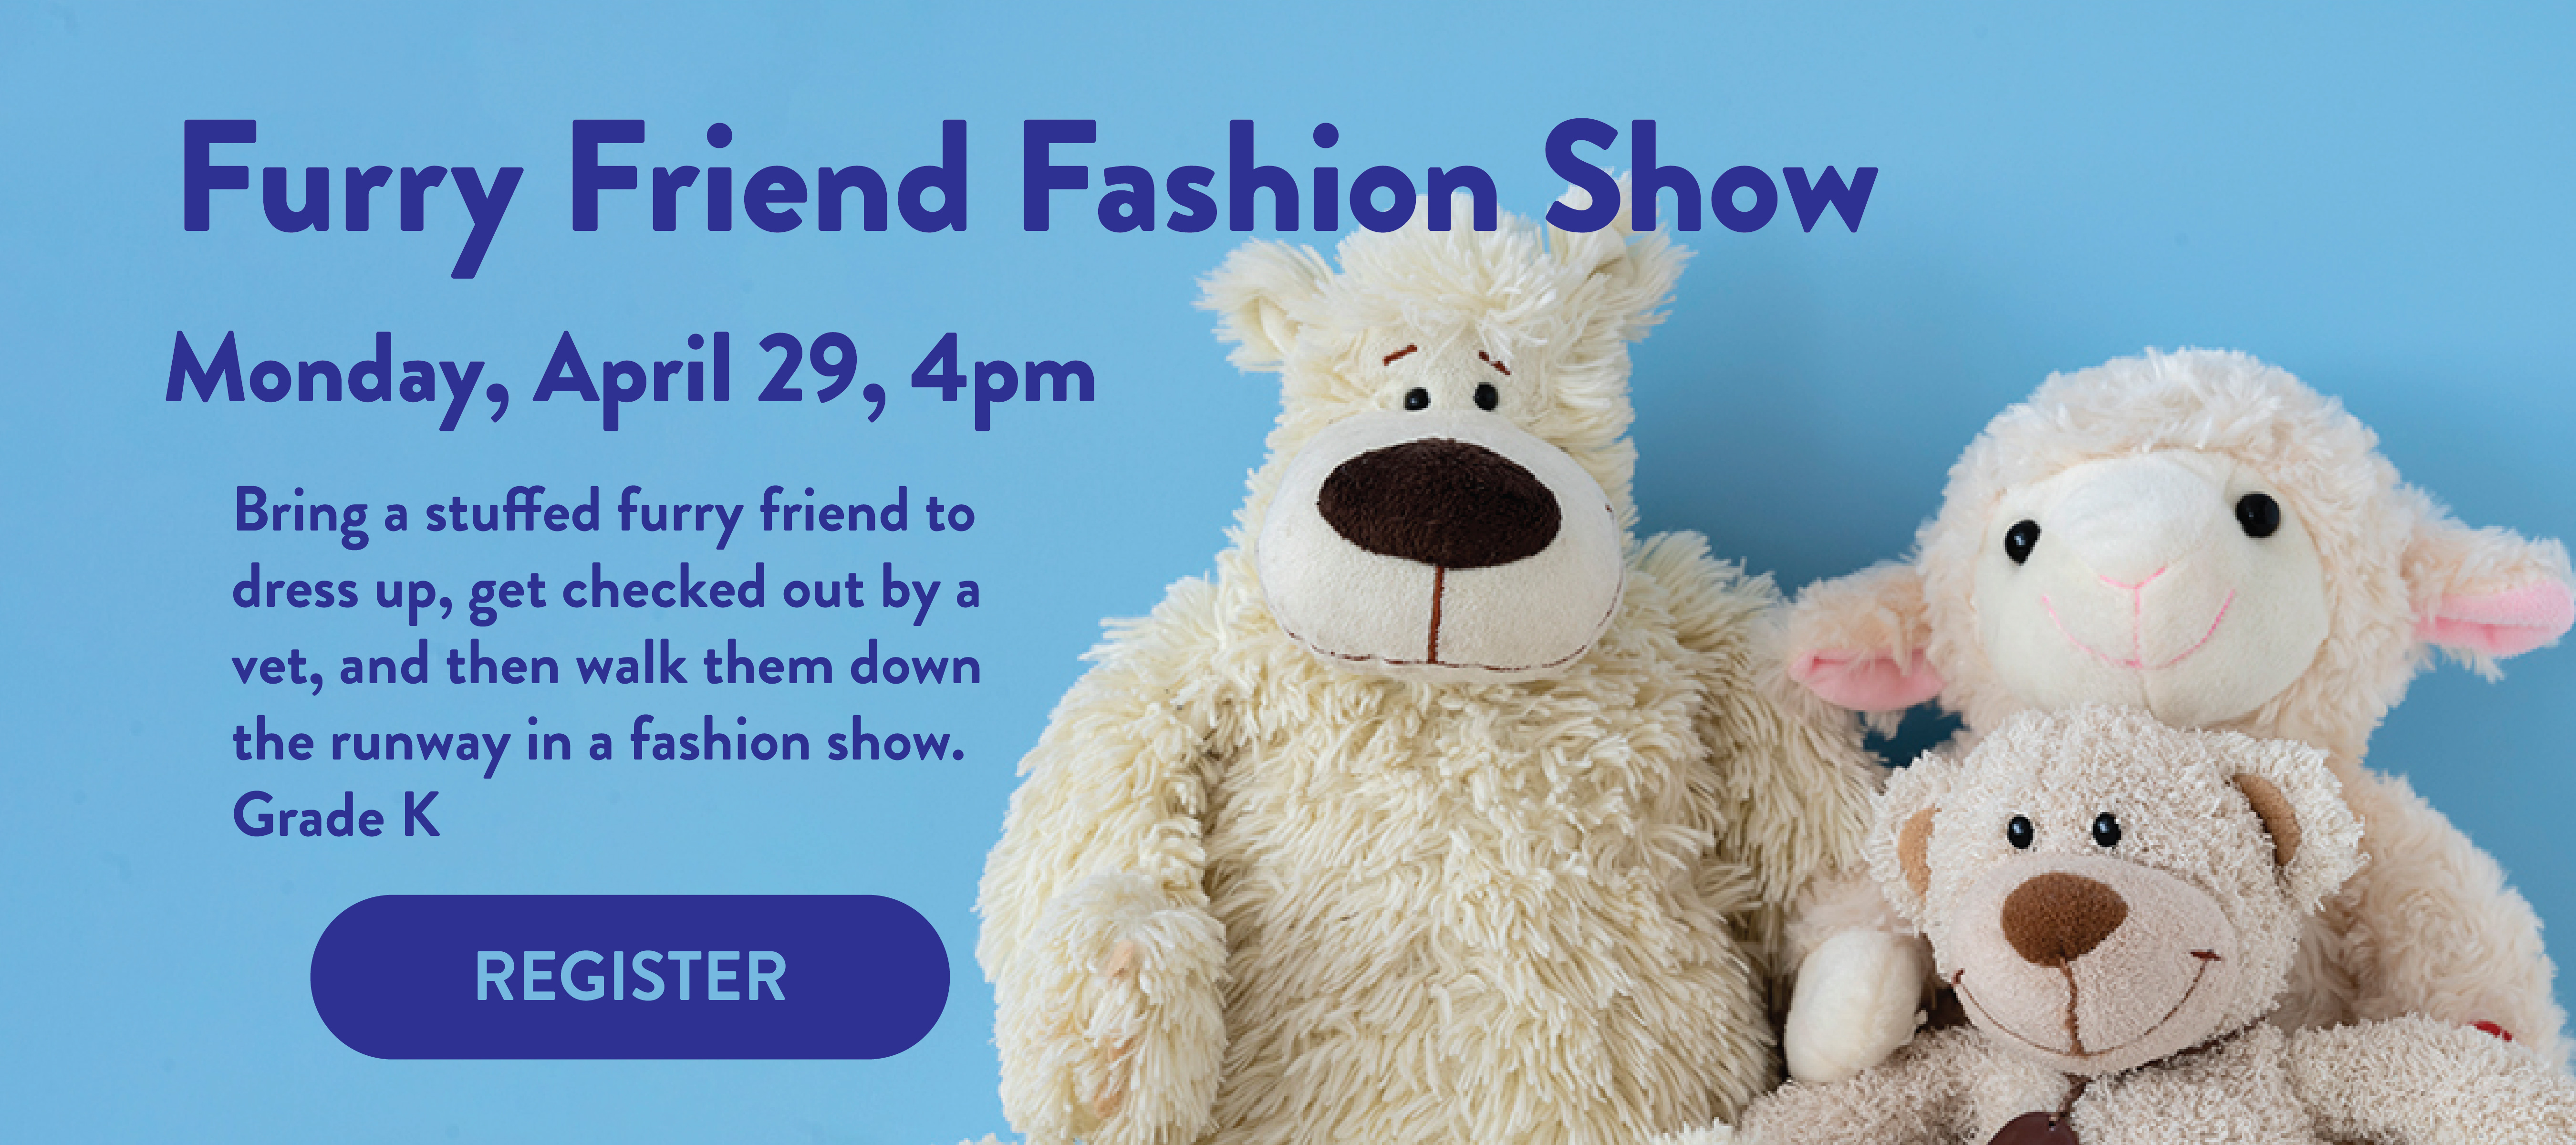 phpl, prospect heights public library, Furry Friend Fashion Show, stuffed animal, dress up, in-person event, Youth